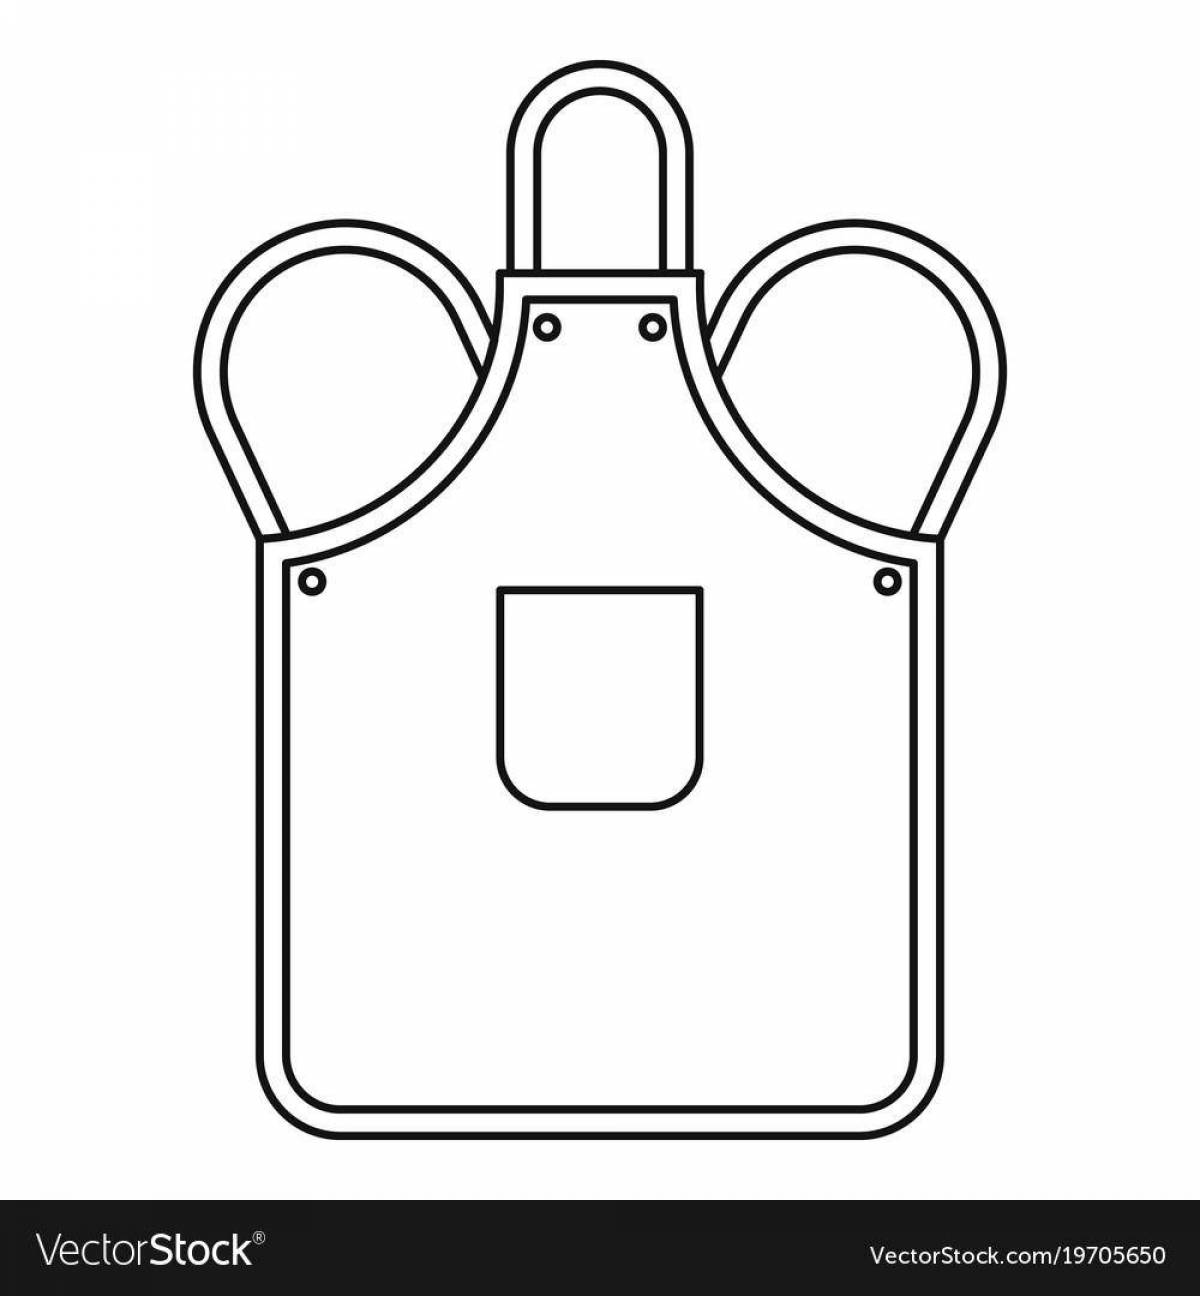 Chef's apron coloring page for kids